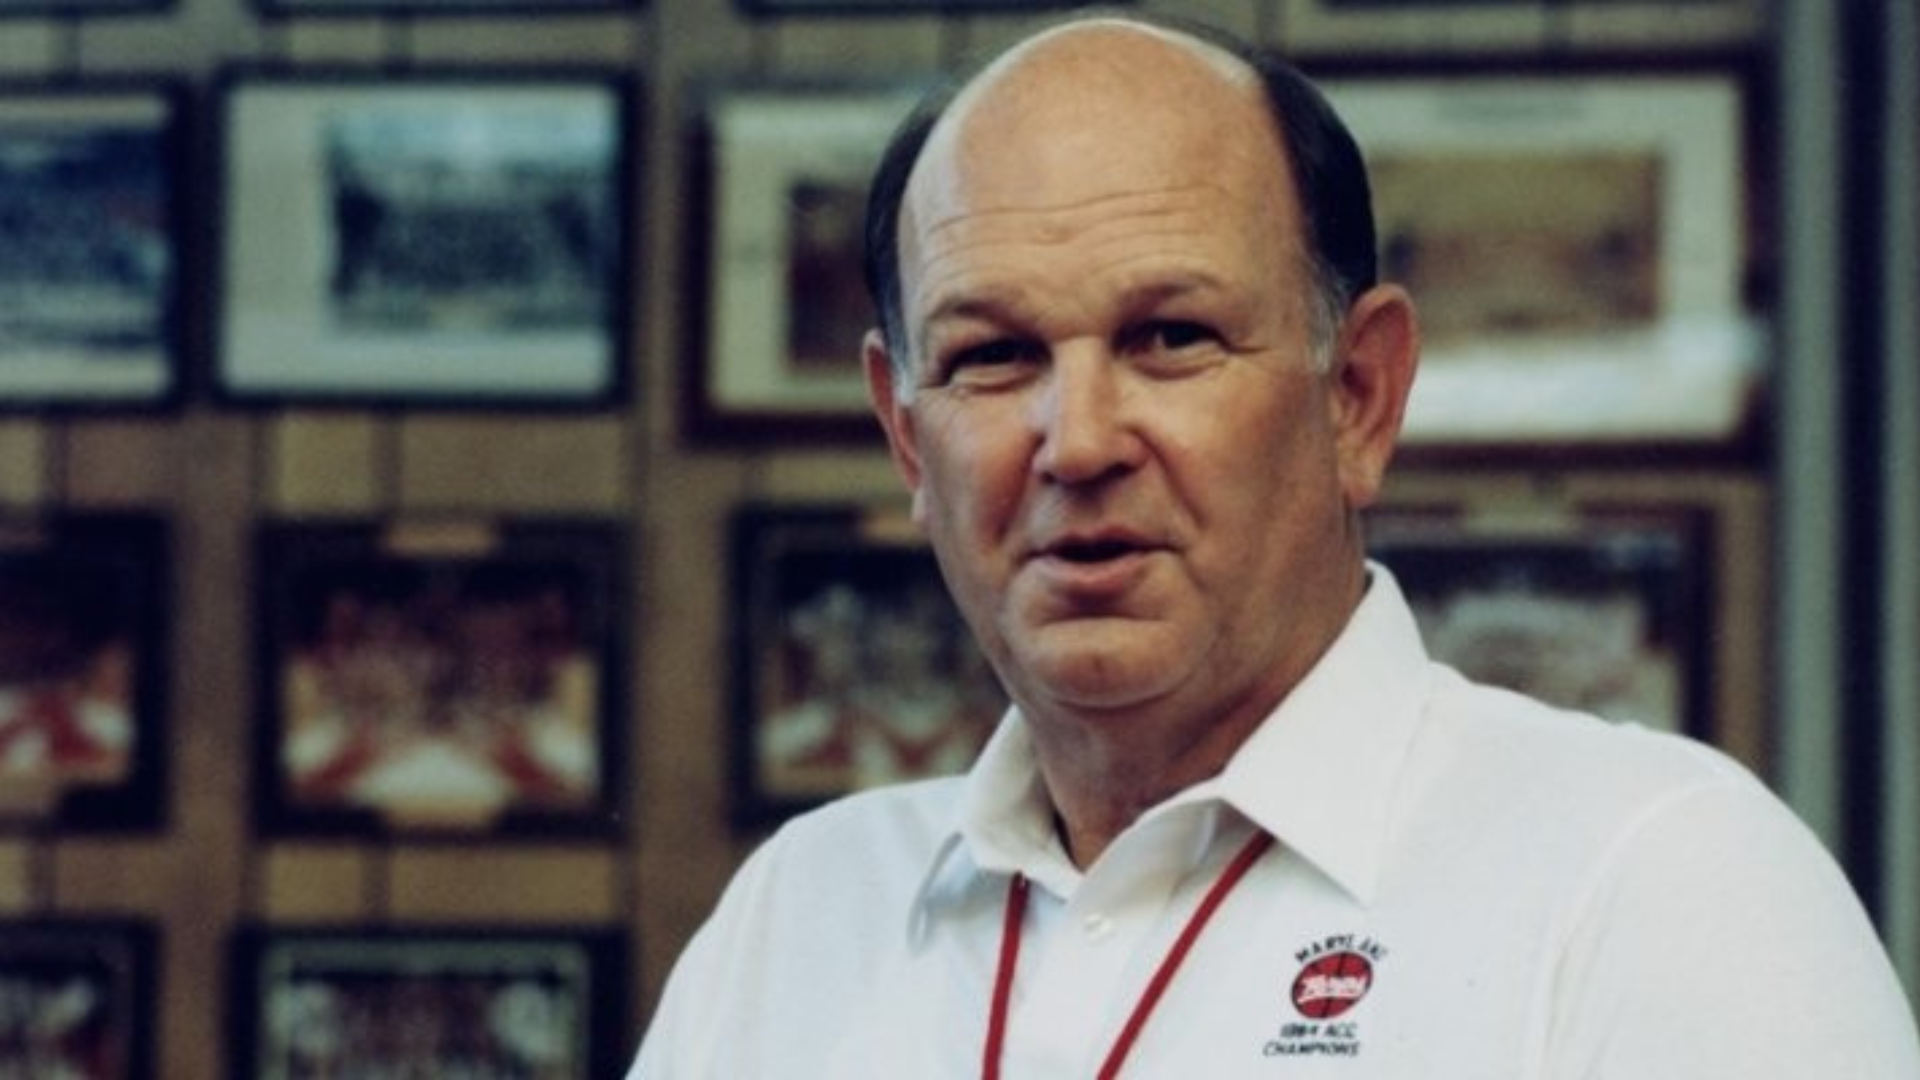 Remembering Lefty Driesell